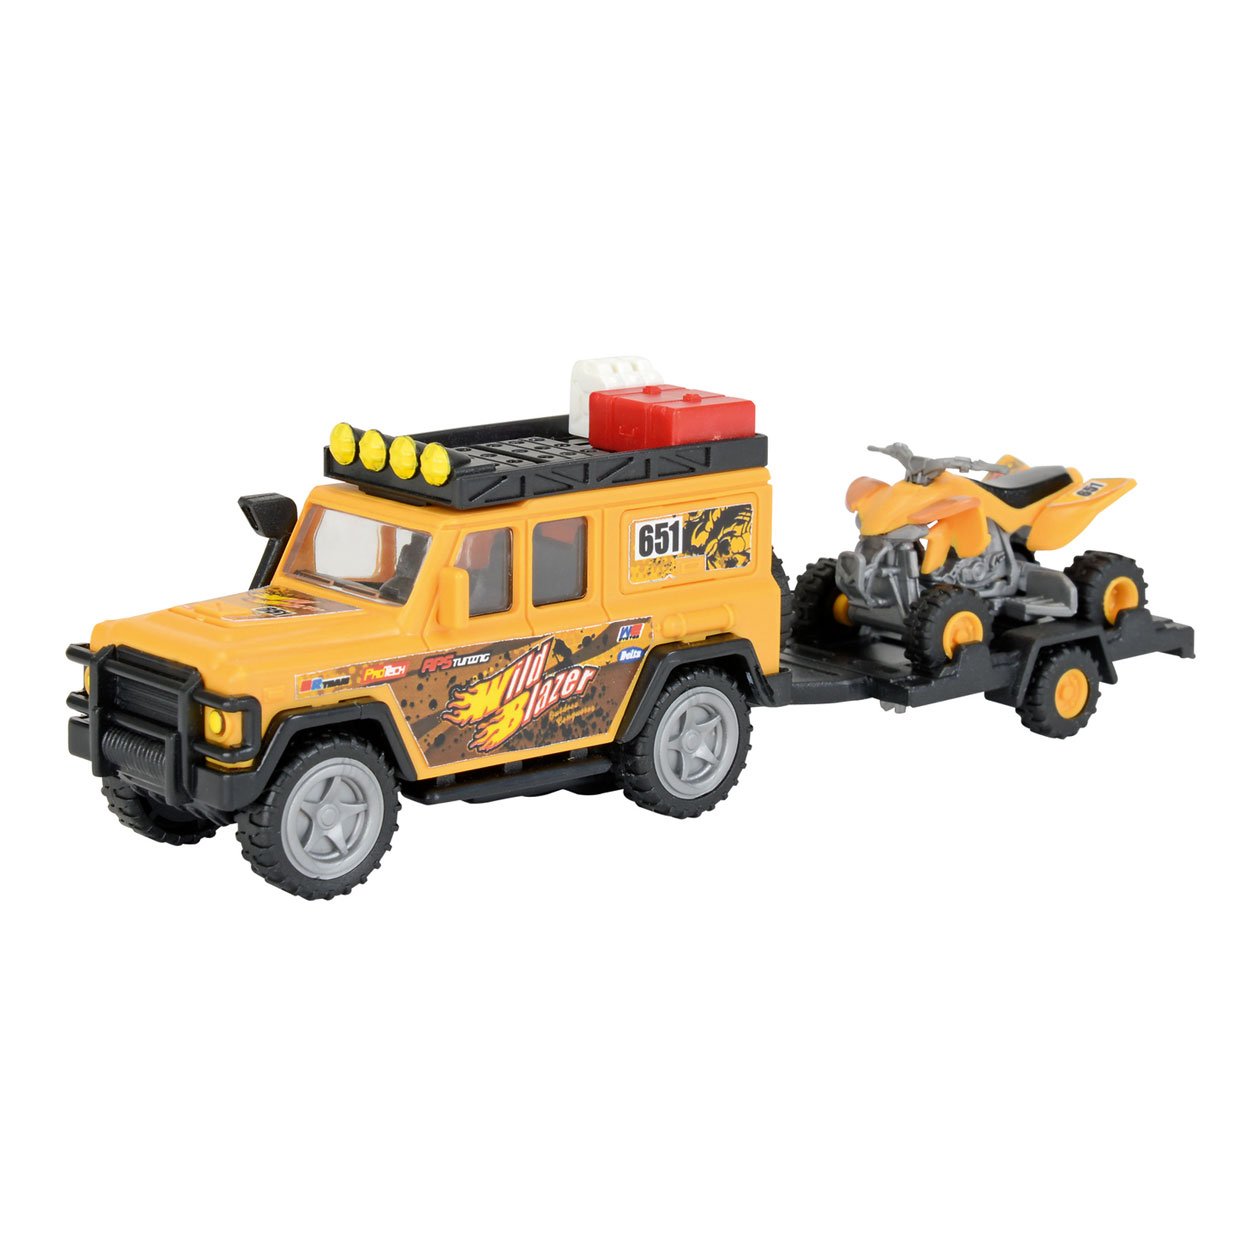 Dickie Toys Dickie's Mate Desert Team, 2 Assorted Dickie-spielzeug GmbH & co. KG 203823